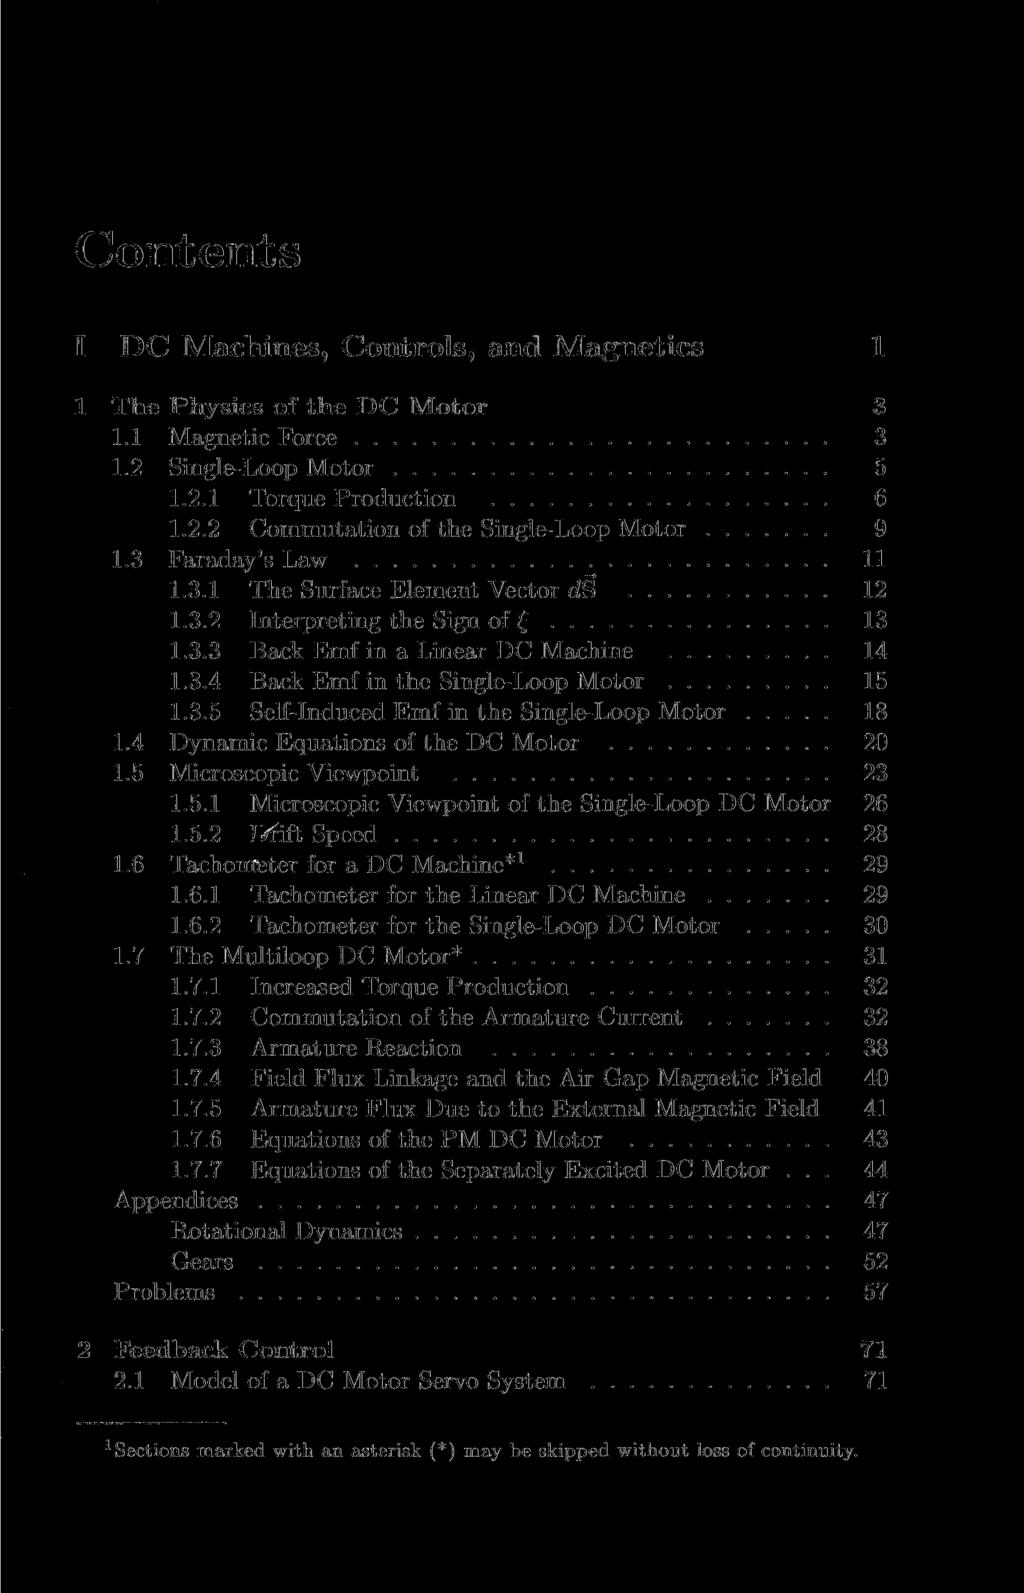 I DC Machines, Controls, and Magnetics 1 1 The Physics of the DC Motor 3 1.1 Magnetic Force 3 1.2 Single-Loop Motor 5 1.2.1 Torque Production 6 1.2.2 Commutation of the Single-Loop Motor 9 1.